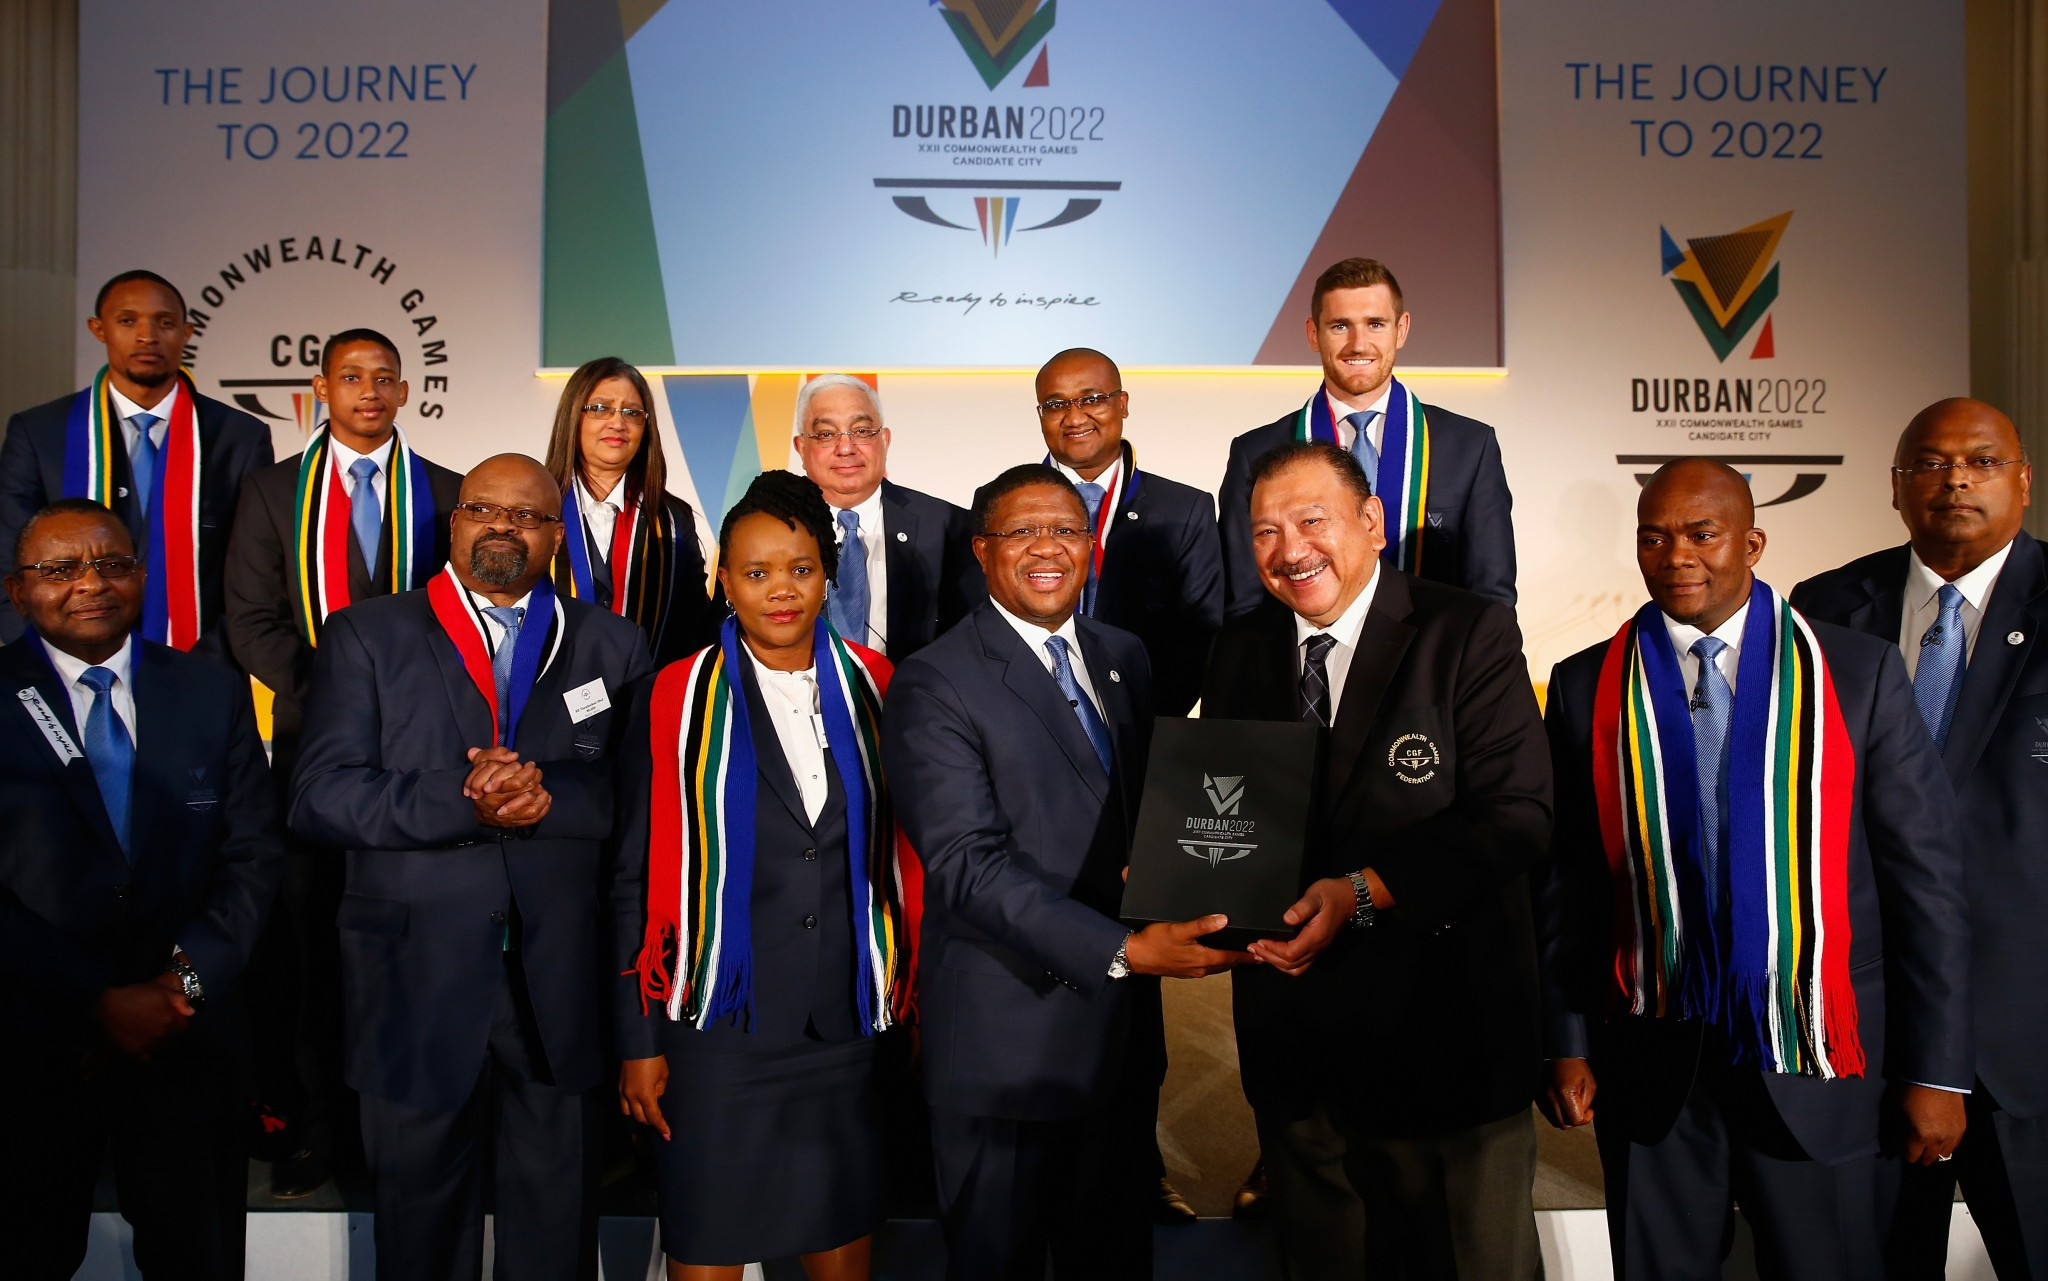 Durban was stripped of the hosting rights for the 2022 Commonwealth Games after missing a series of deadlines ©Getty Images